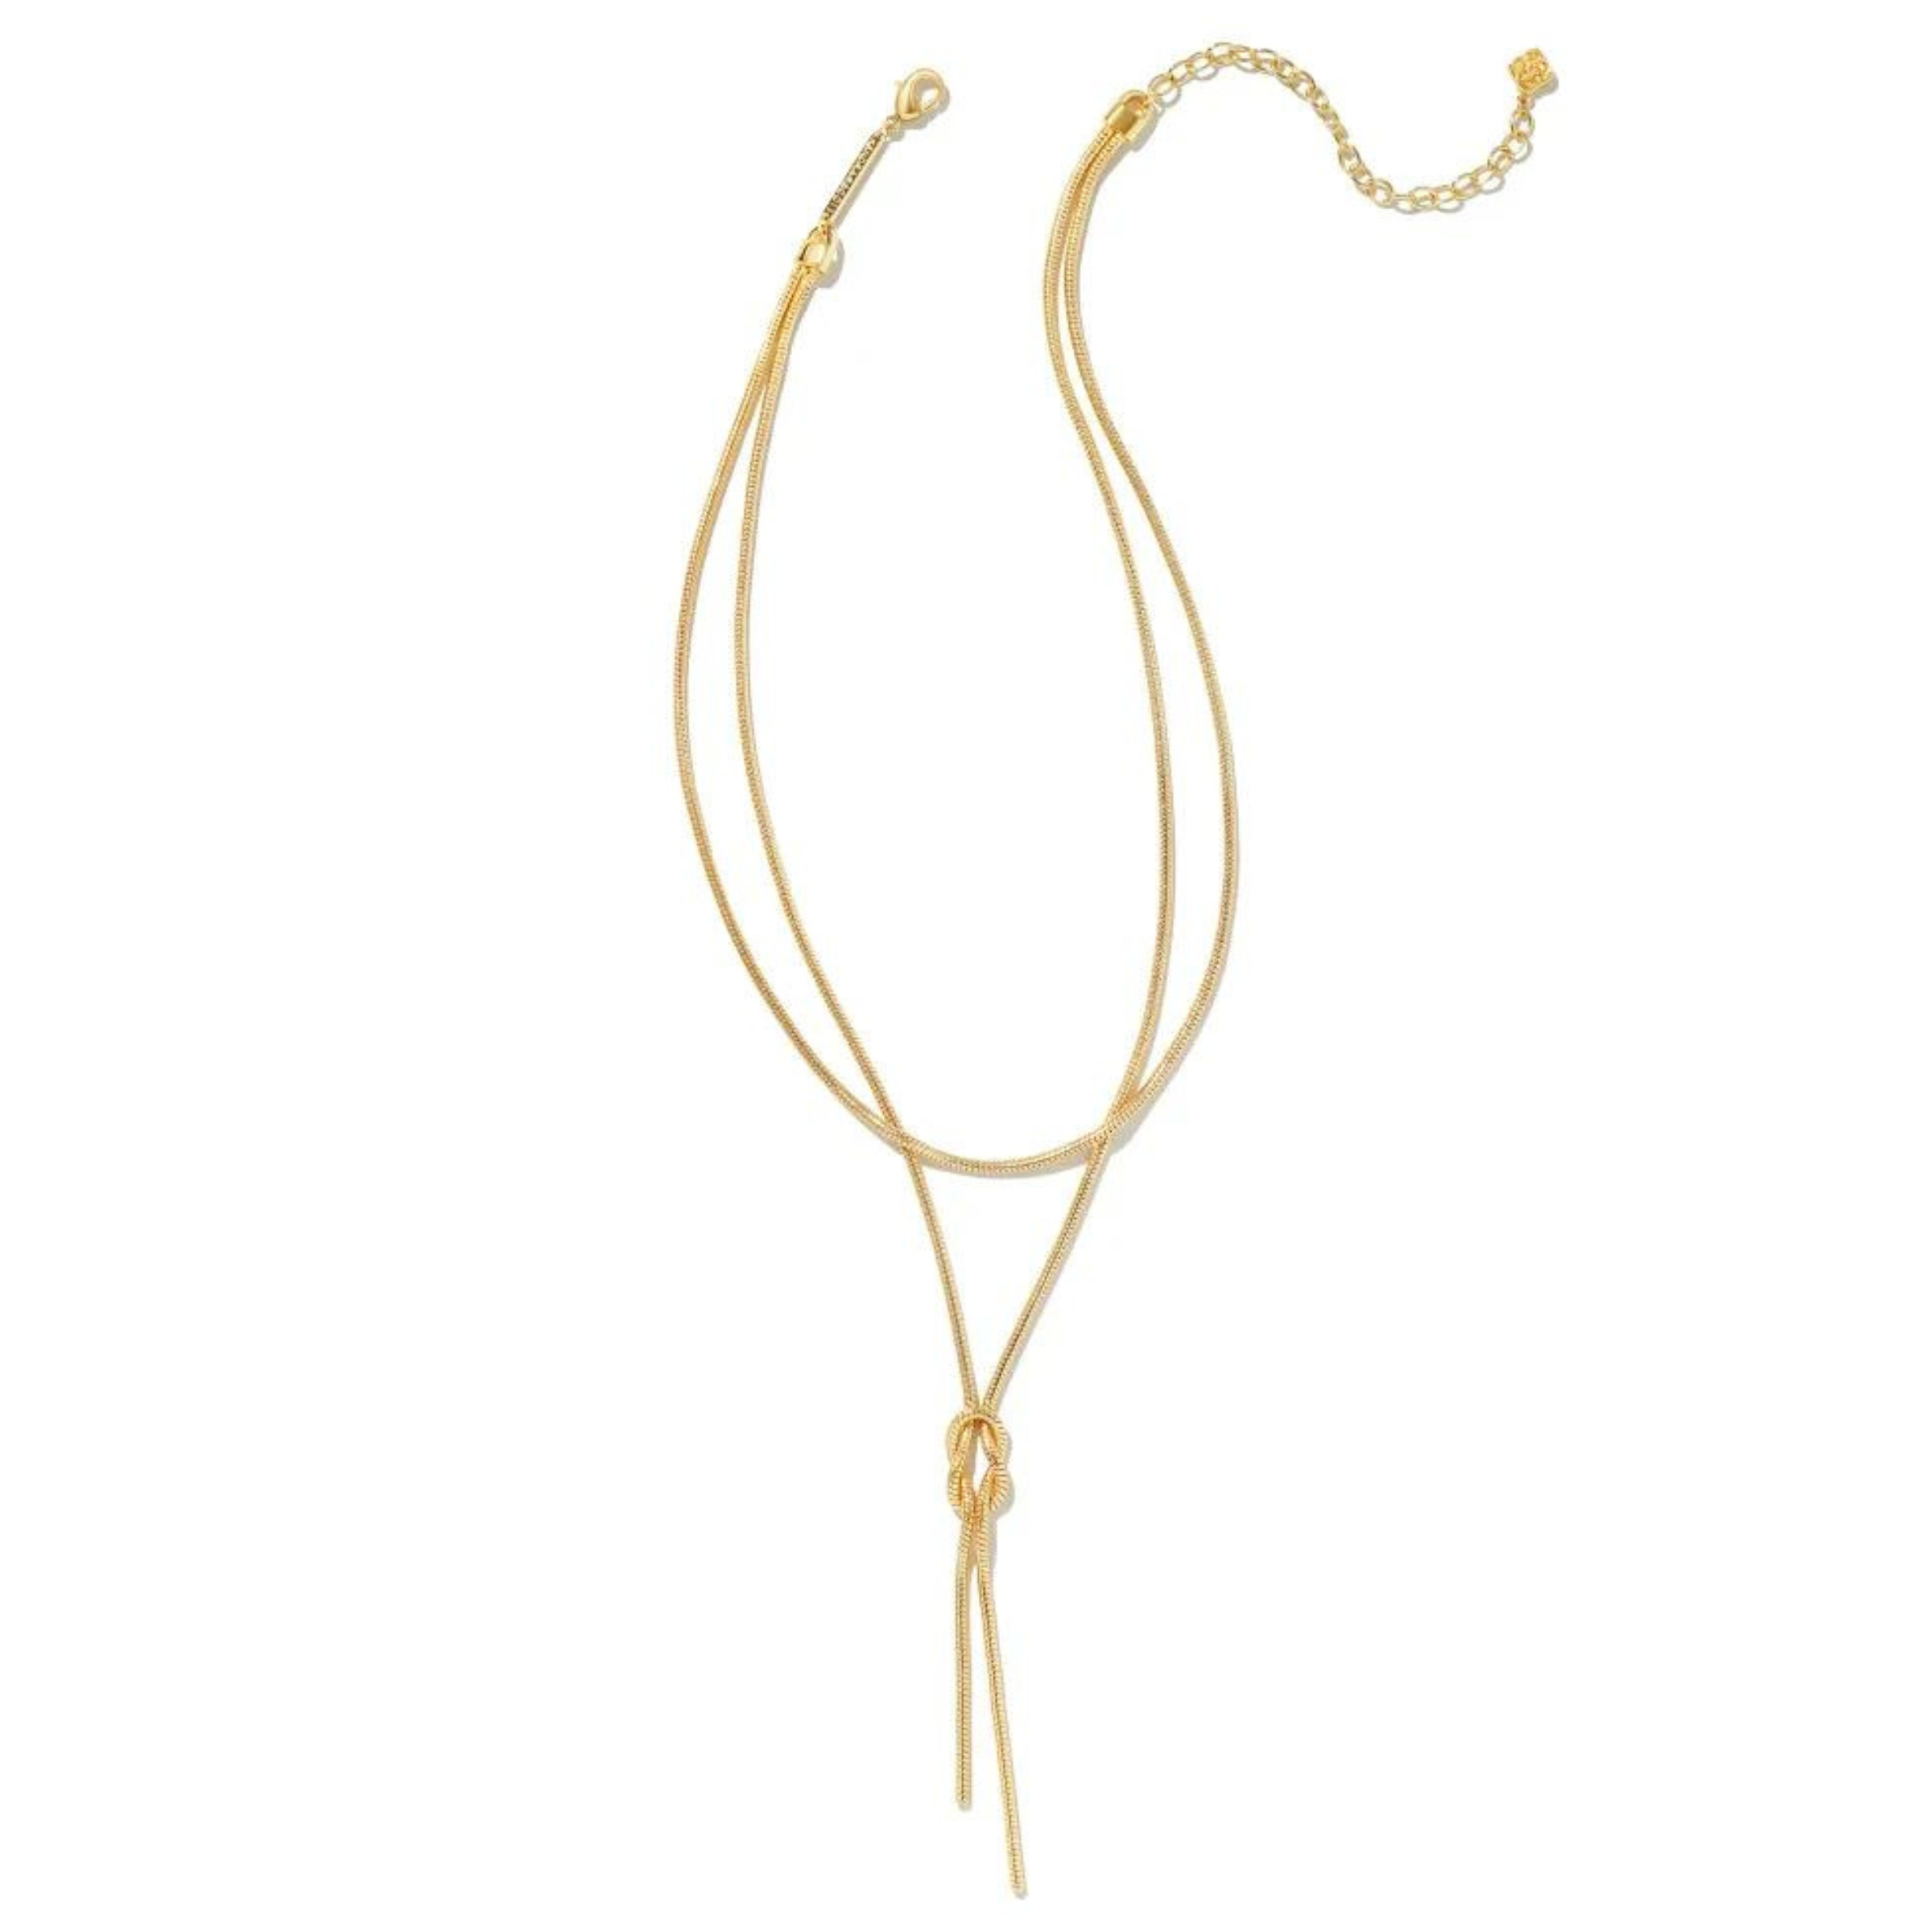 Kendra Scott | Annie Y Necklace in Gold - Giddy Up Glamour Boutique